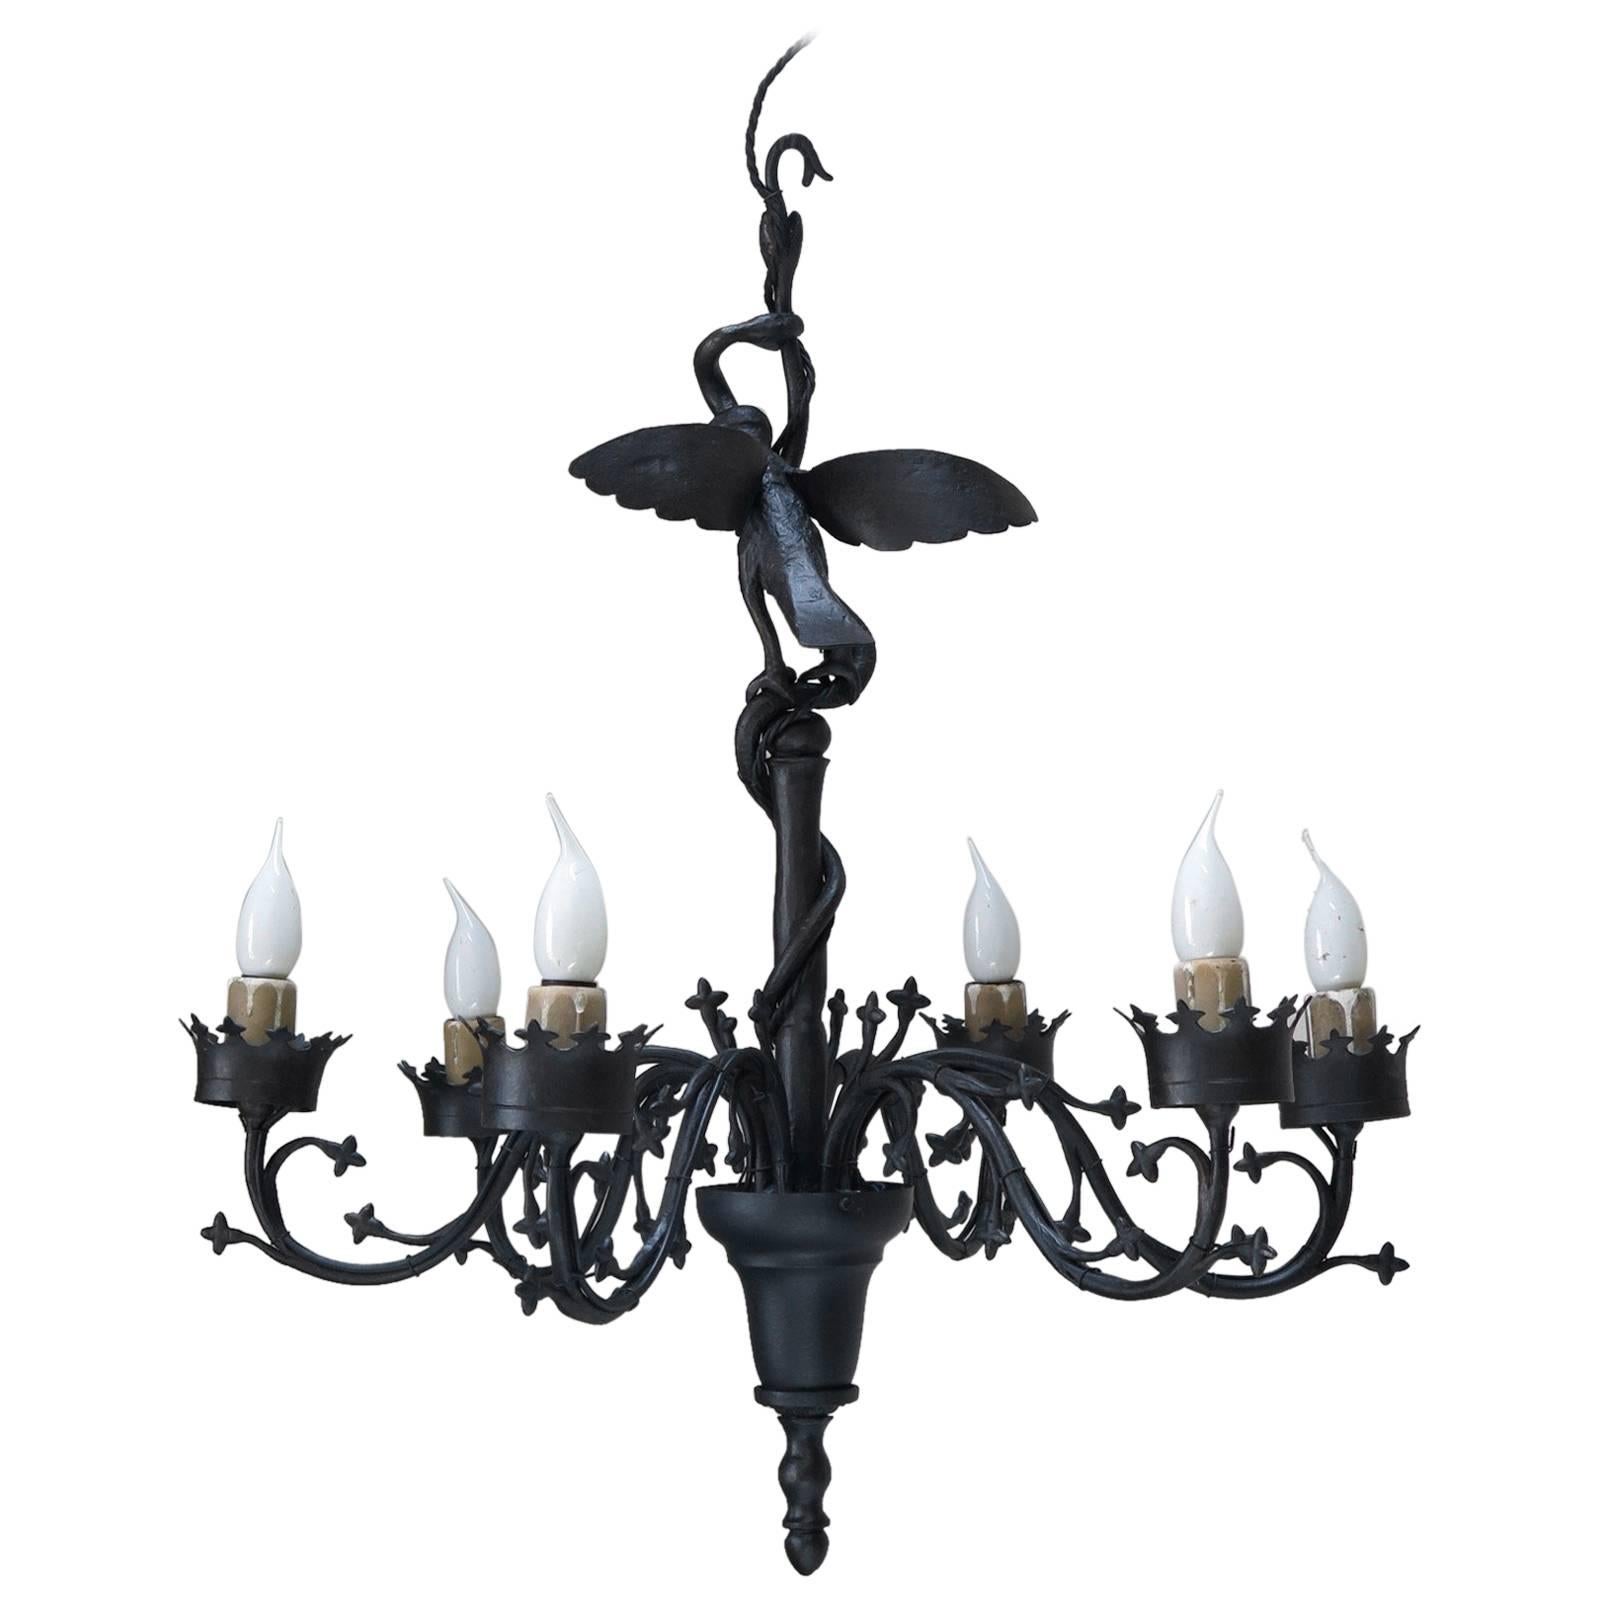 Unusual Wrought Iron Chandelier with Bird and Serpents, France, circa 1940s For Sale